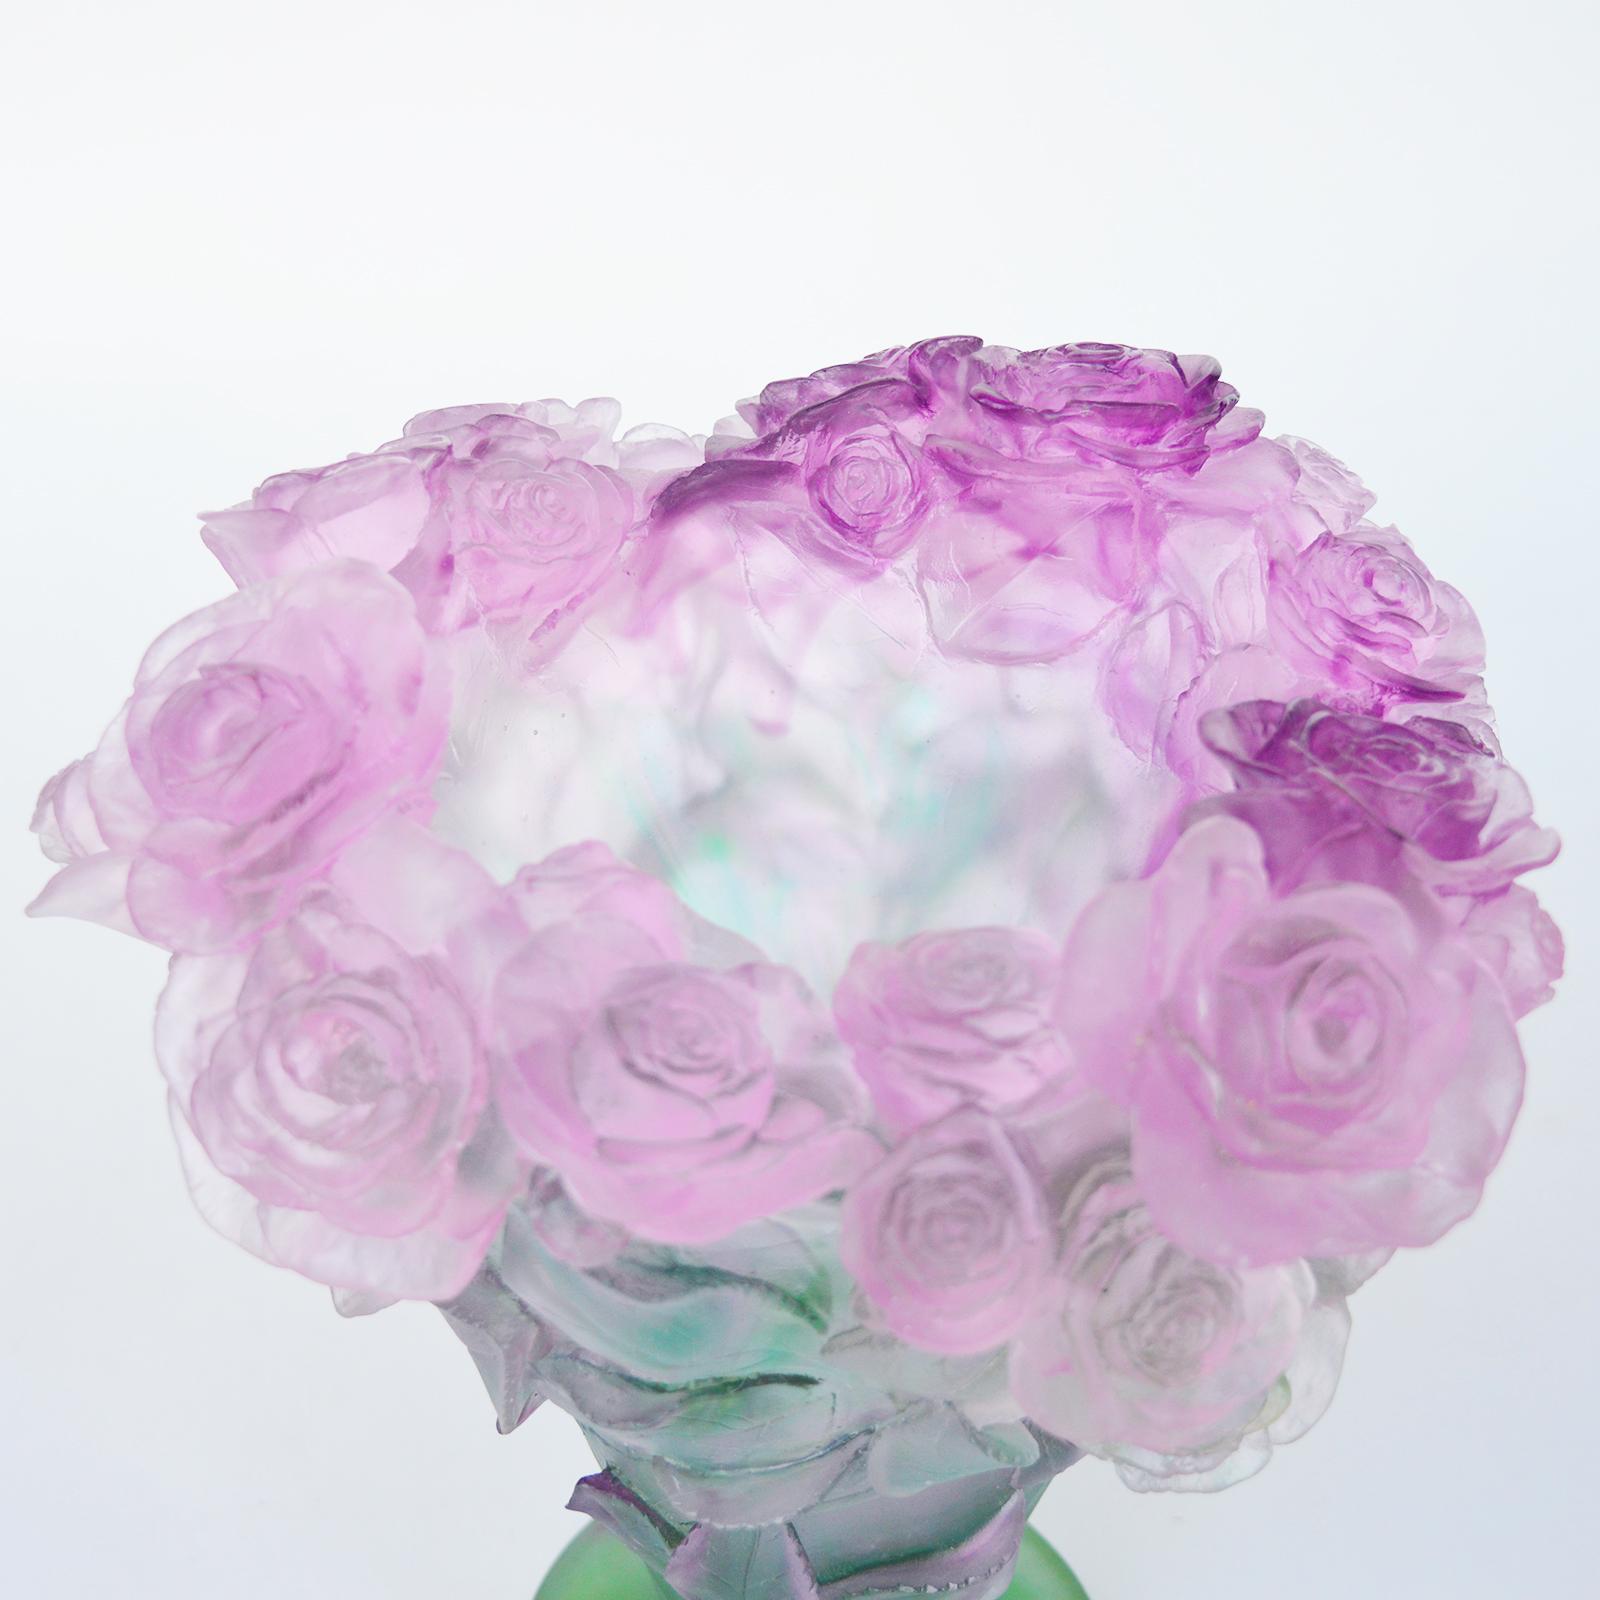 Crystal Rose Passion Vase by Daum, 1990s For Sale